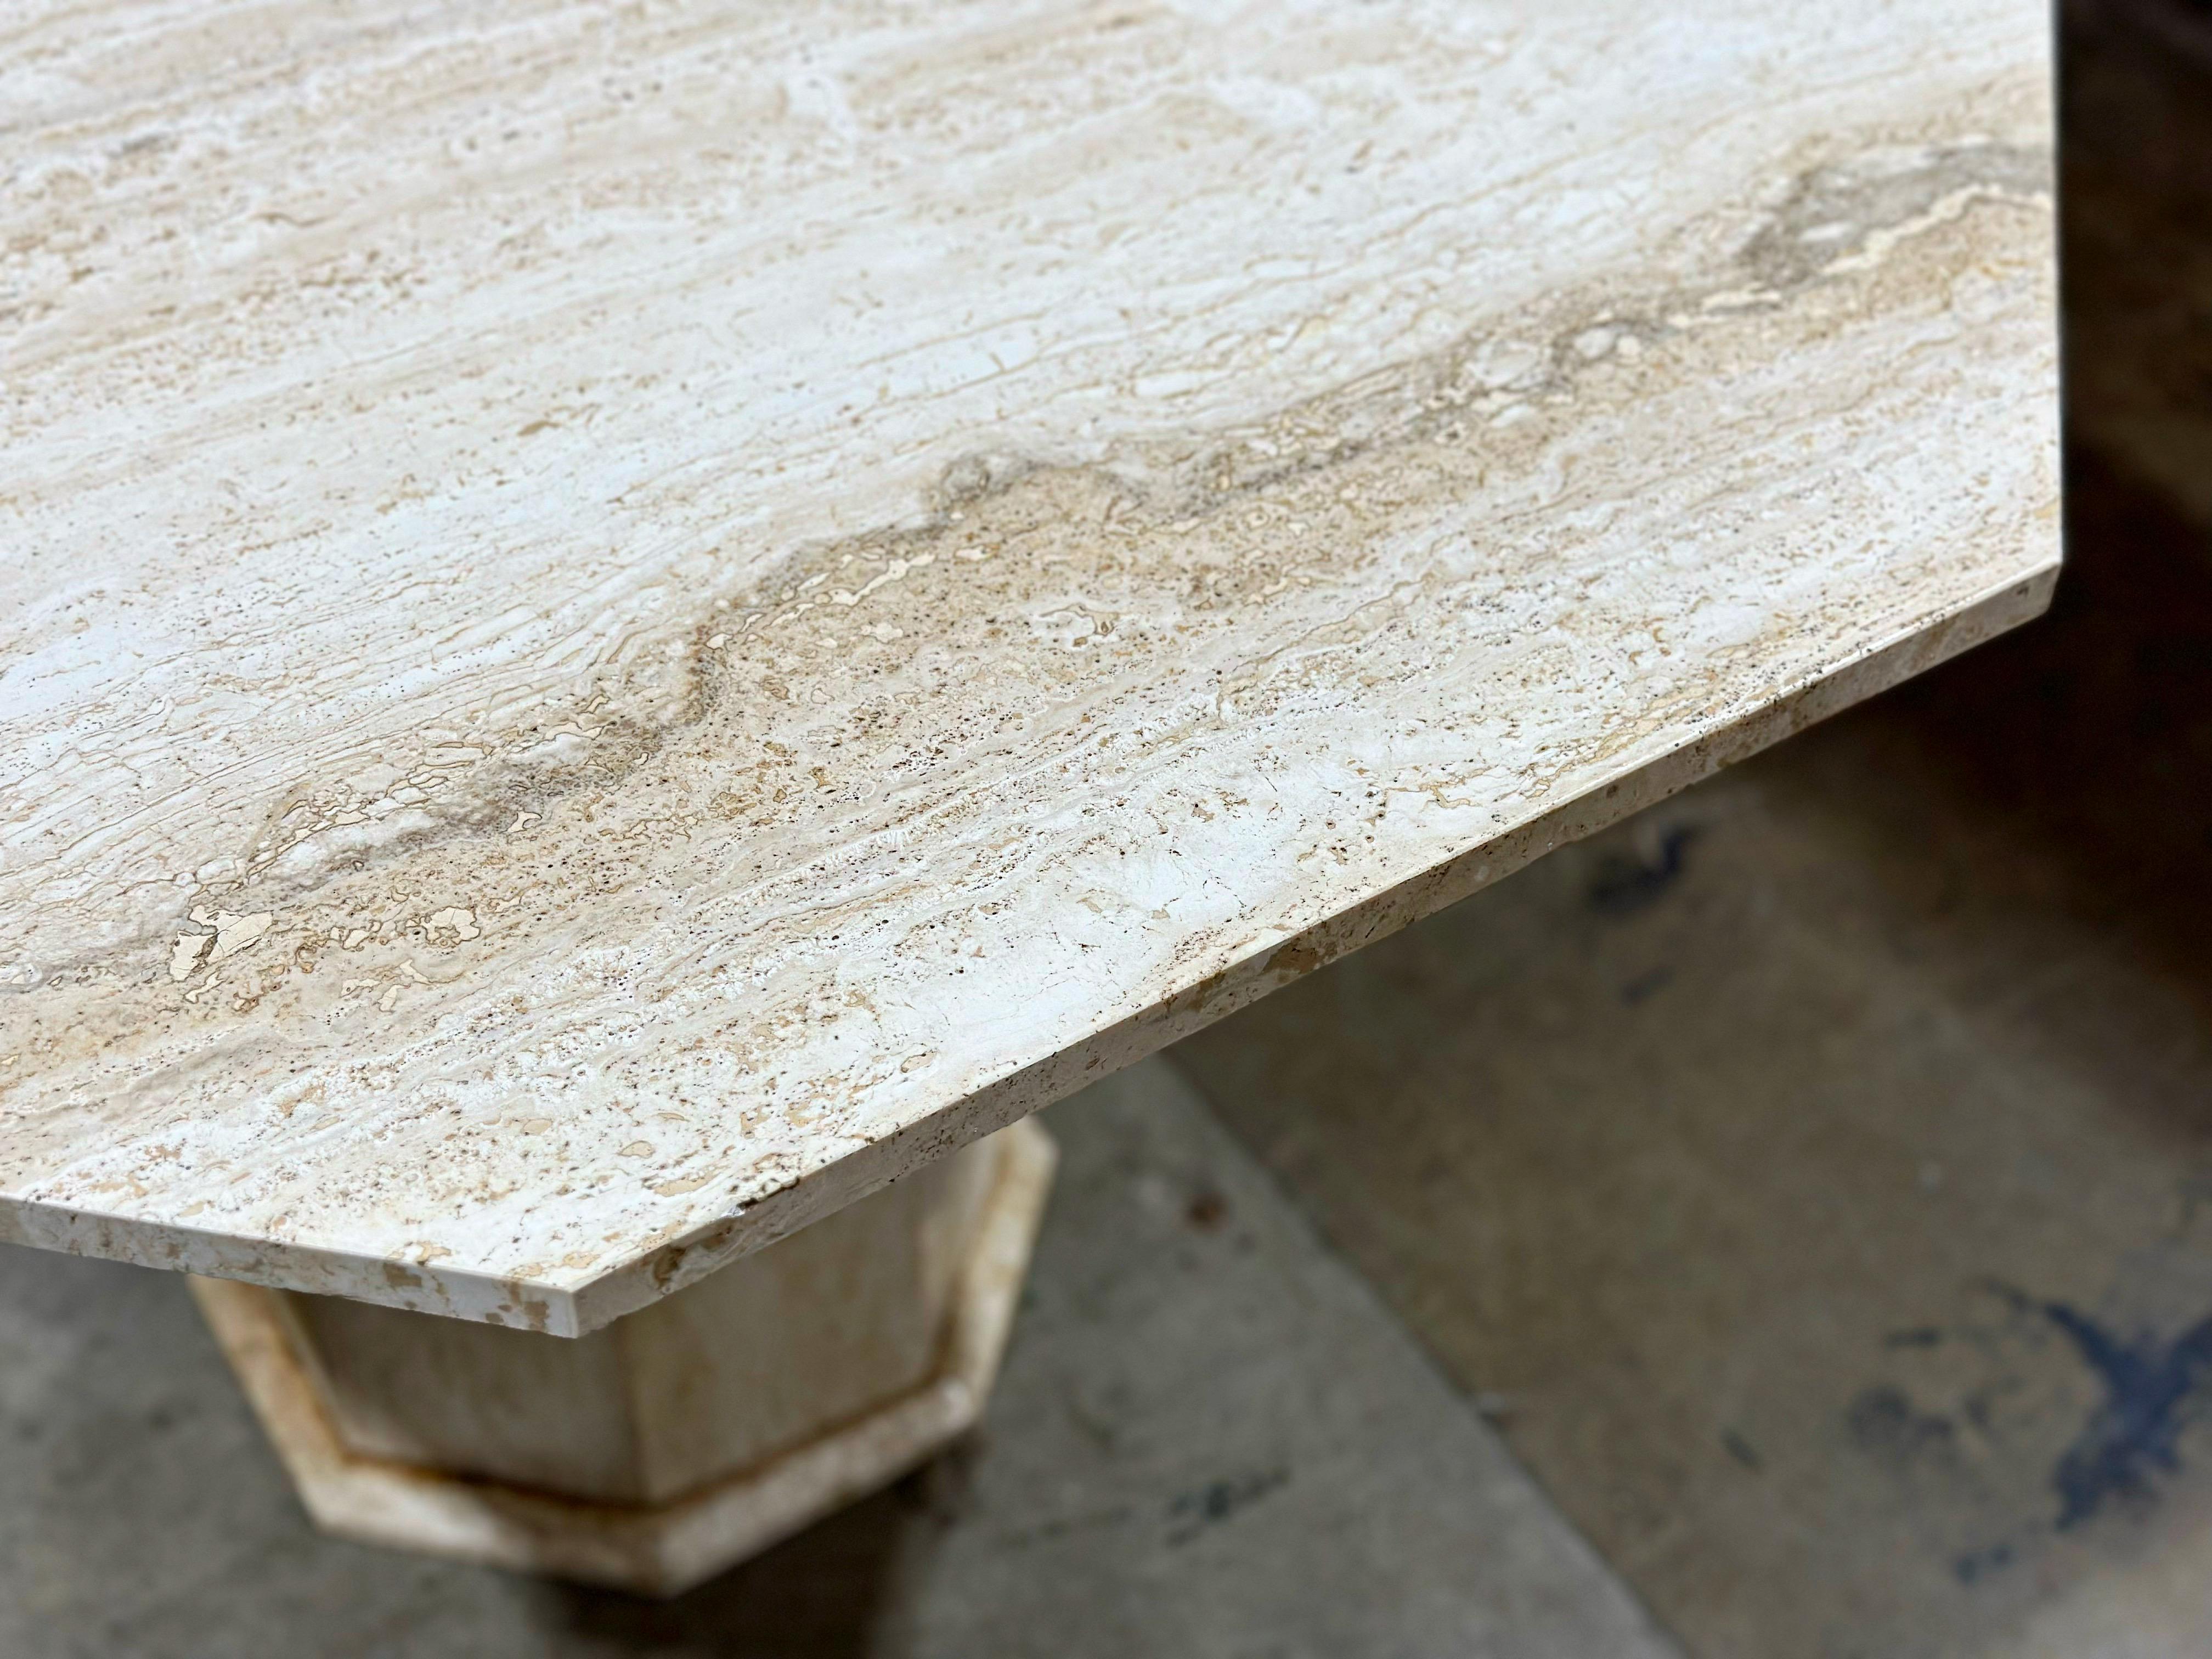 Vintage organic modern octagonal travertine dining table, Italy 1970s.
Clean straight edges on the table top with gorgeous undulating graining. Matte finish. Excellent condition - no issues of note. Clean and ready for use. Two pieces for easy